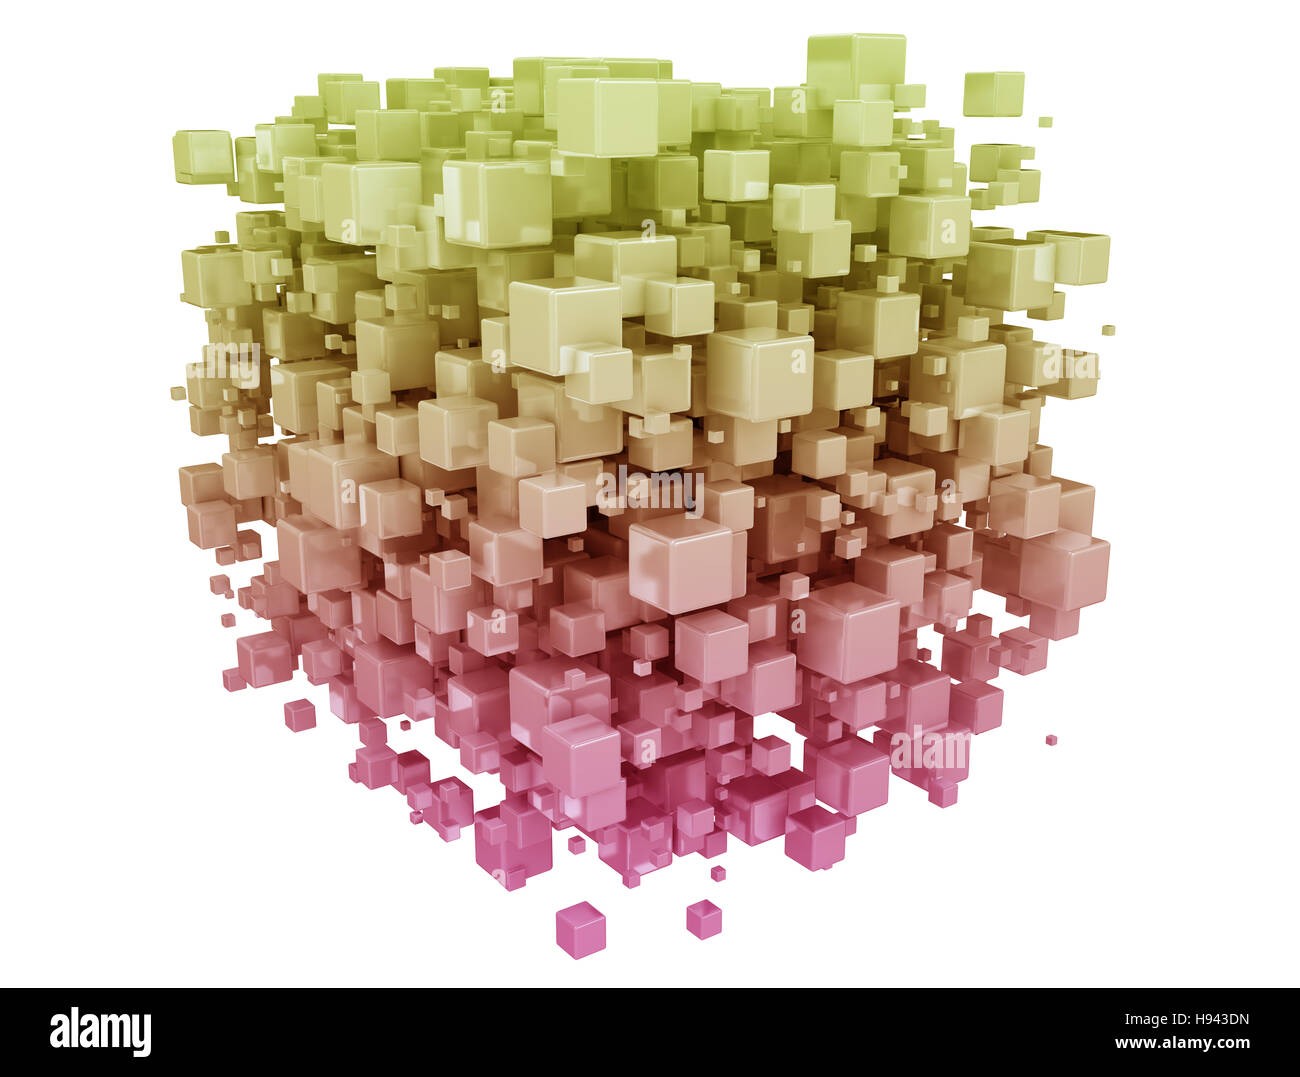 Abstract connected cubes - network Stock Photo